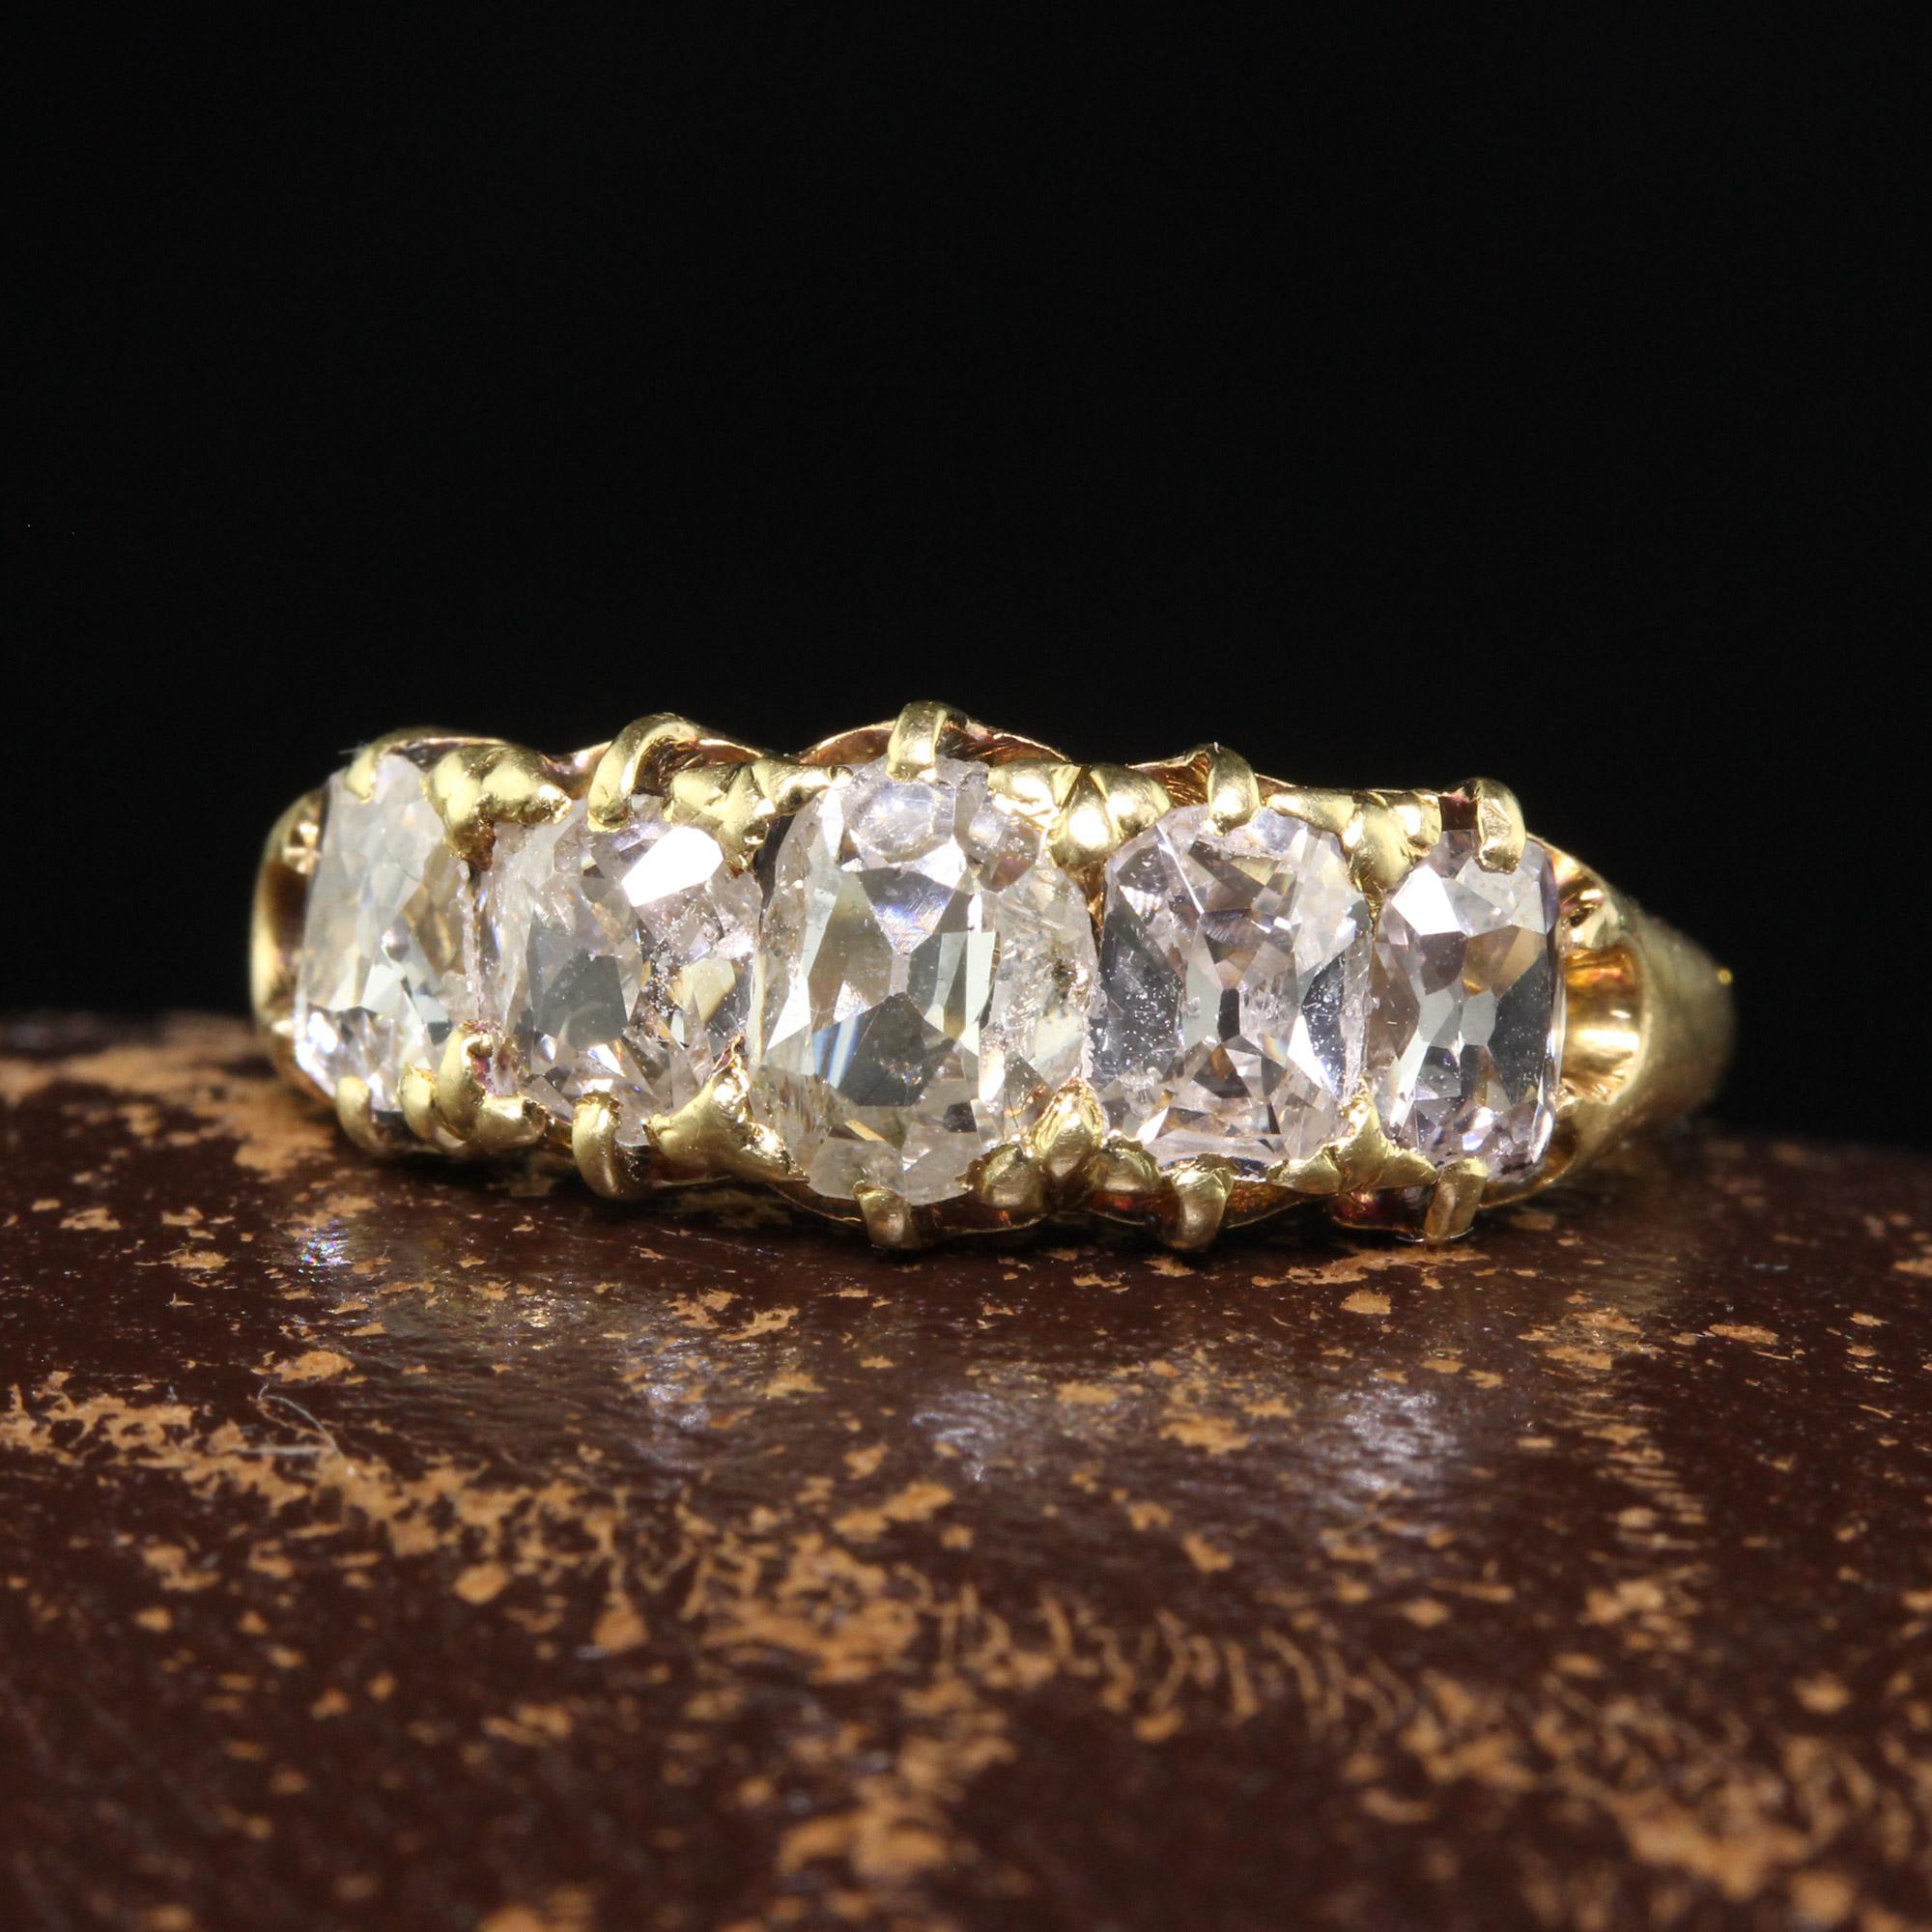 Beautiful Antique Victorian 18K Yellow Gold Old Mine Cut Diamond Five Stone Ring. This incredible Victorian old mine diamond band is crafted in 18k yellow gold. The top of the ring has five old mine cut diamonds that look incredible due to their